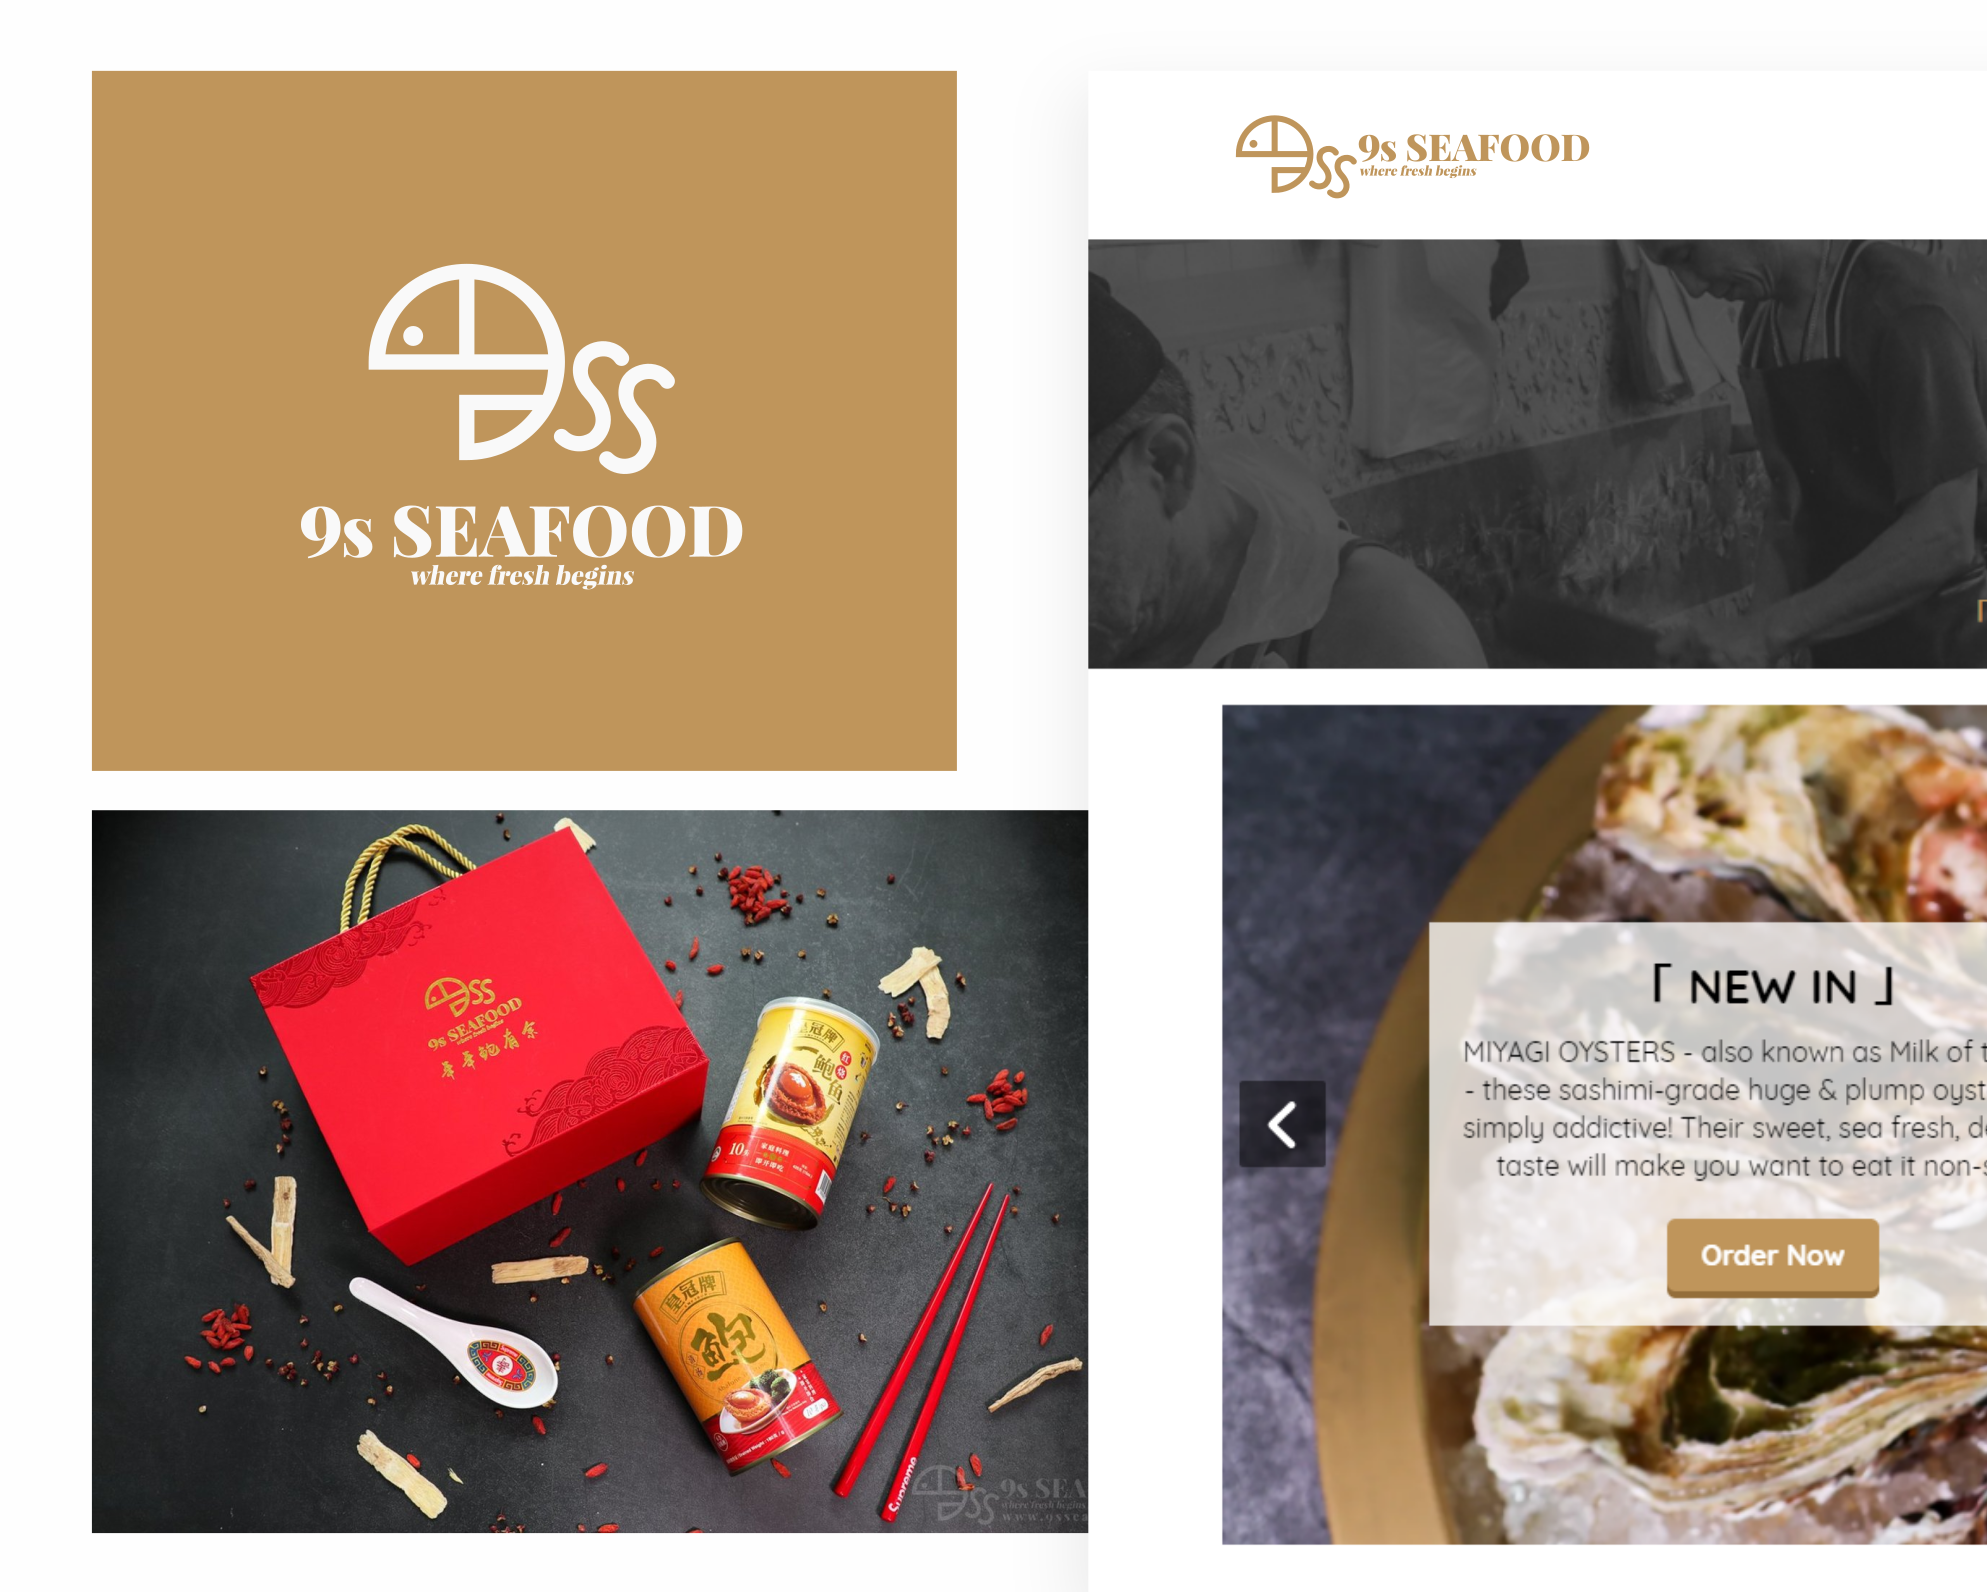 Logo design for 9s Seafood. Designed by Johnery